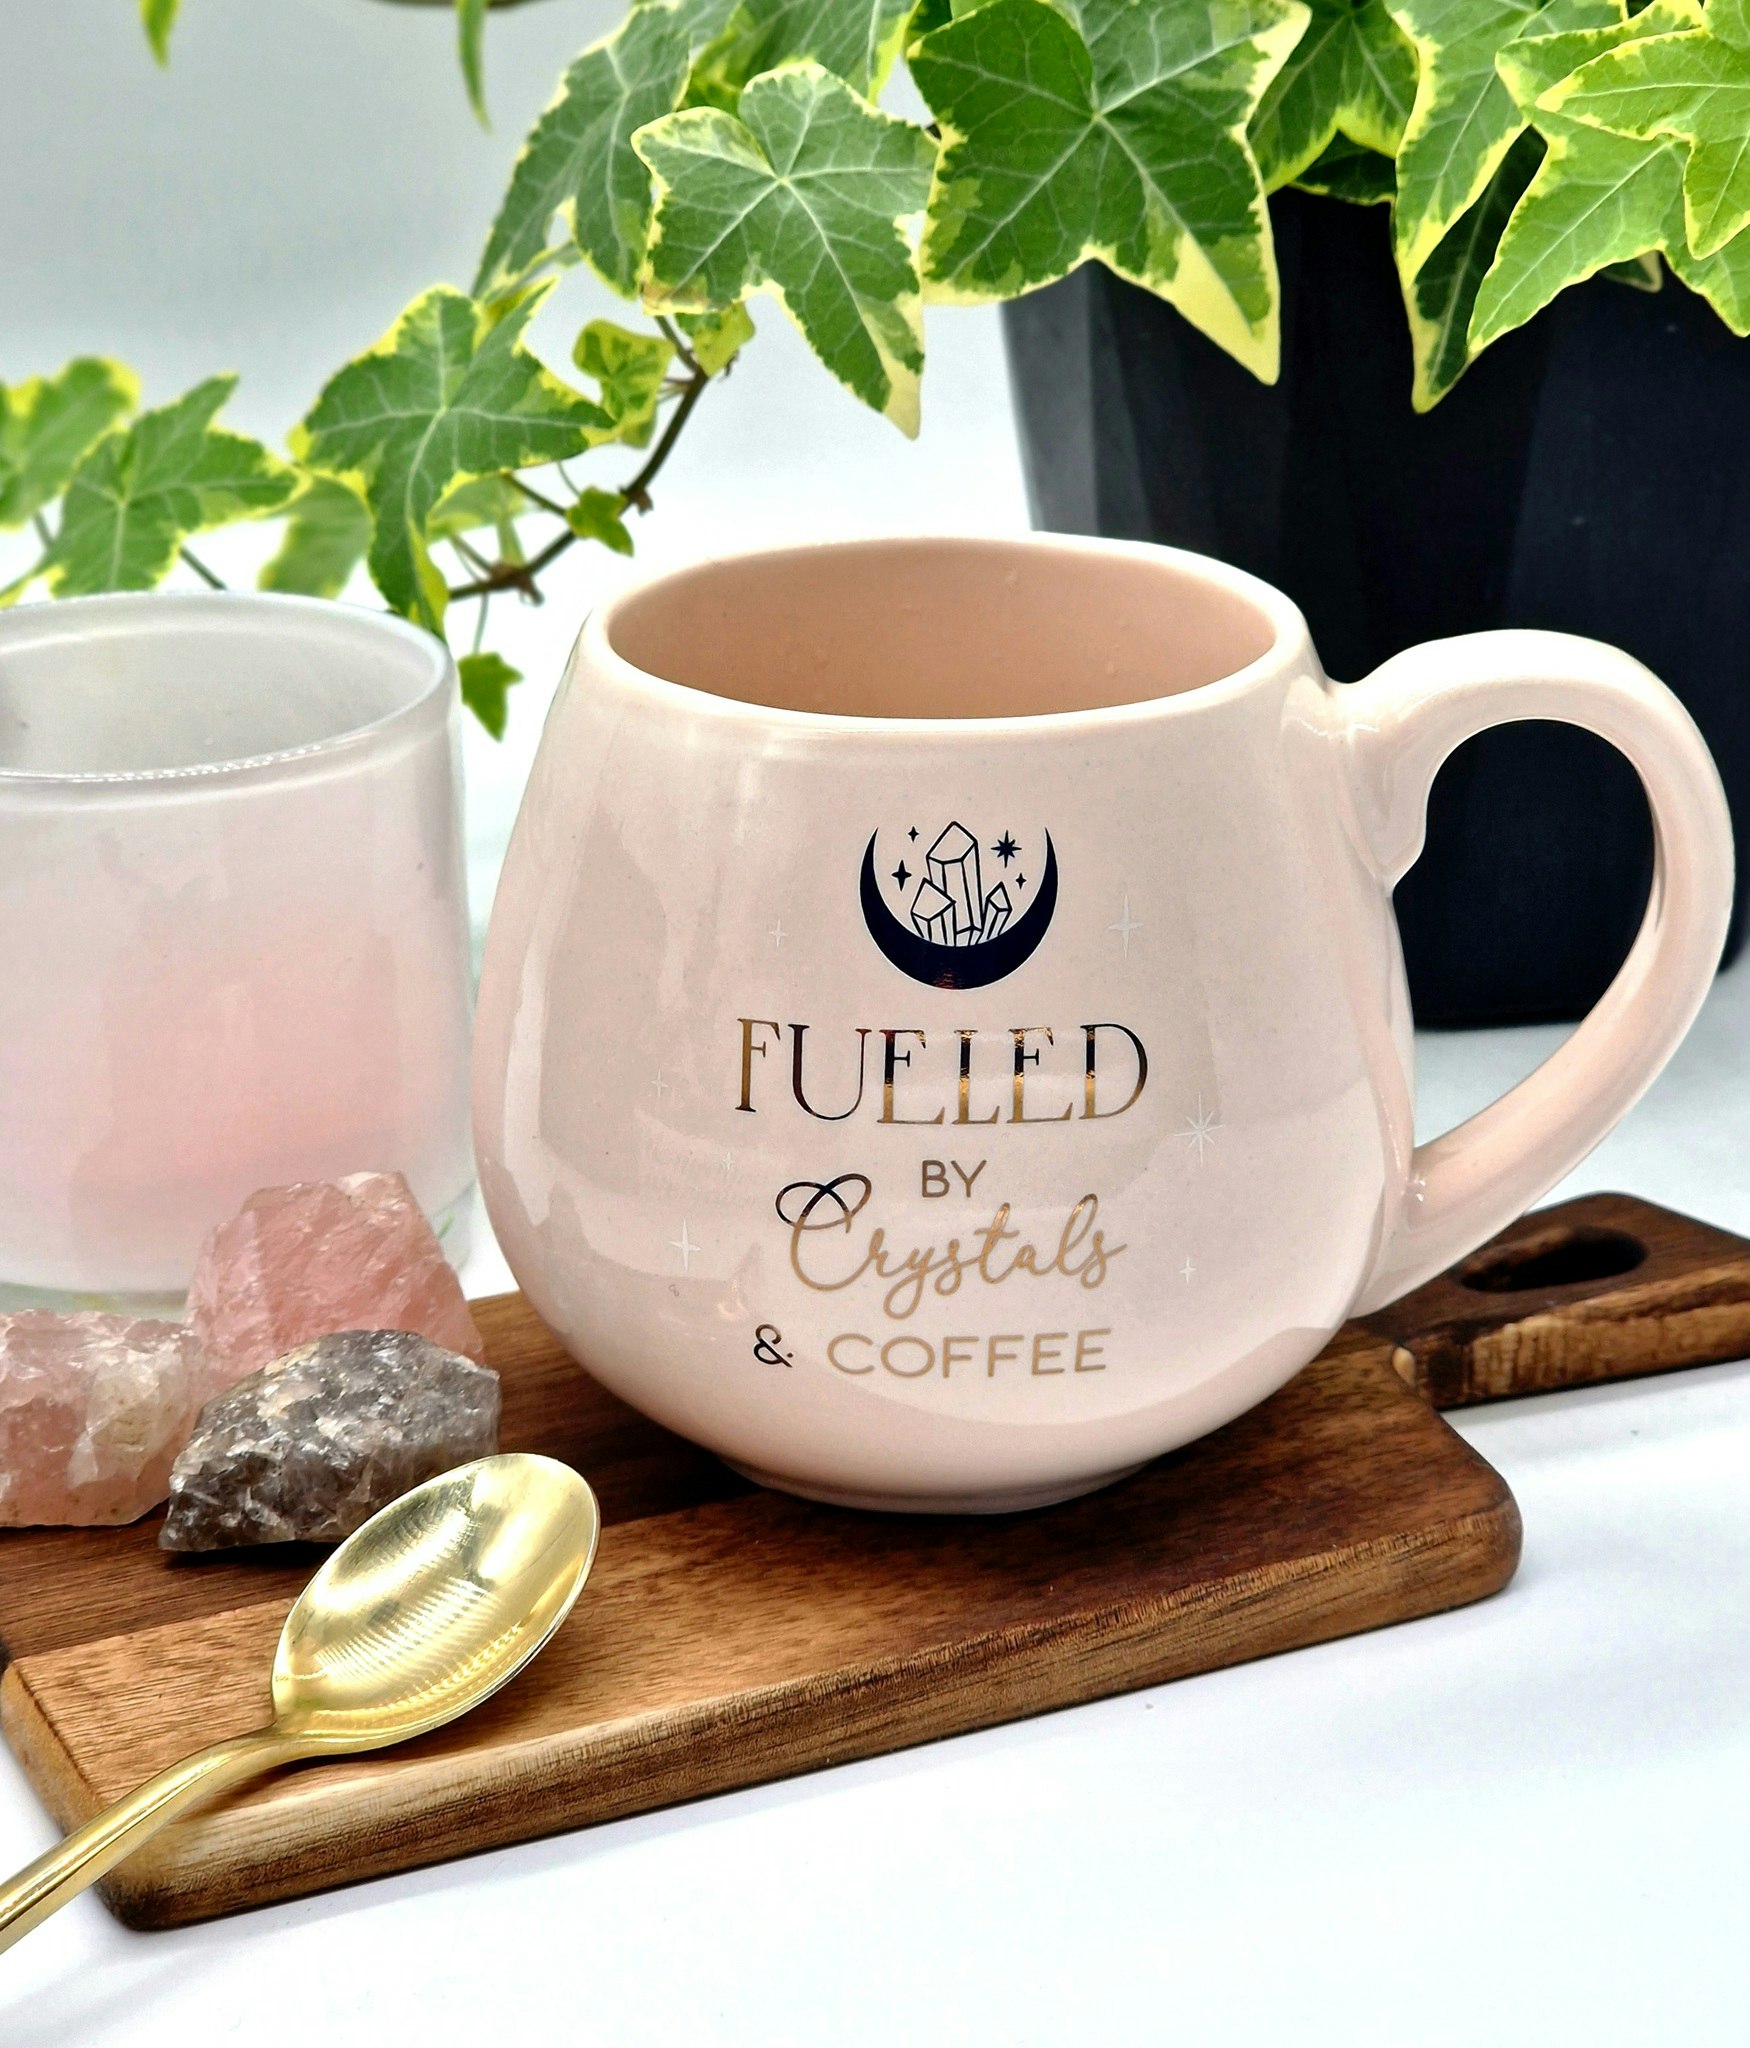 Mugg "Fueled by crystals & coffee"